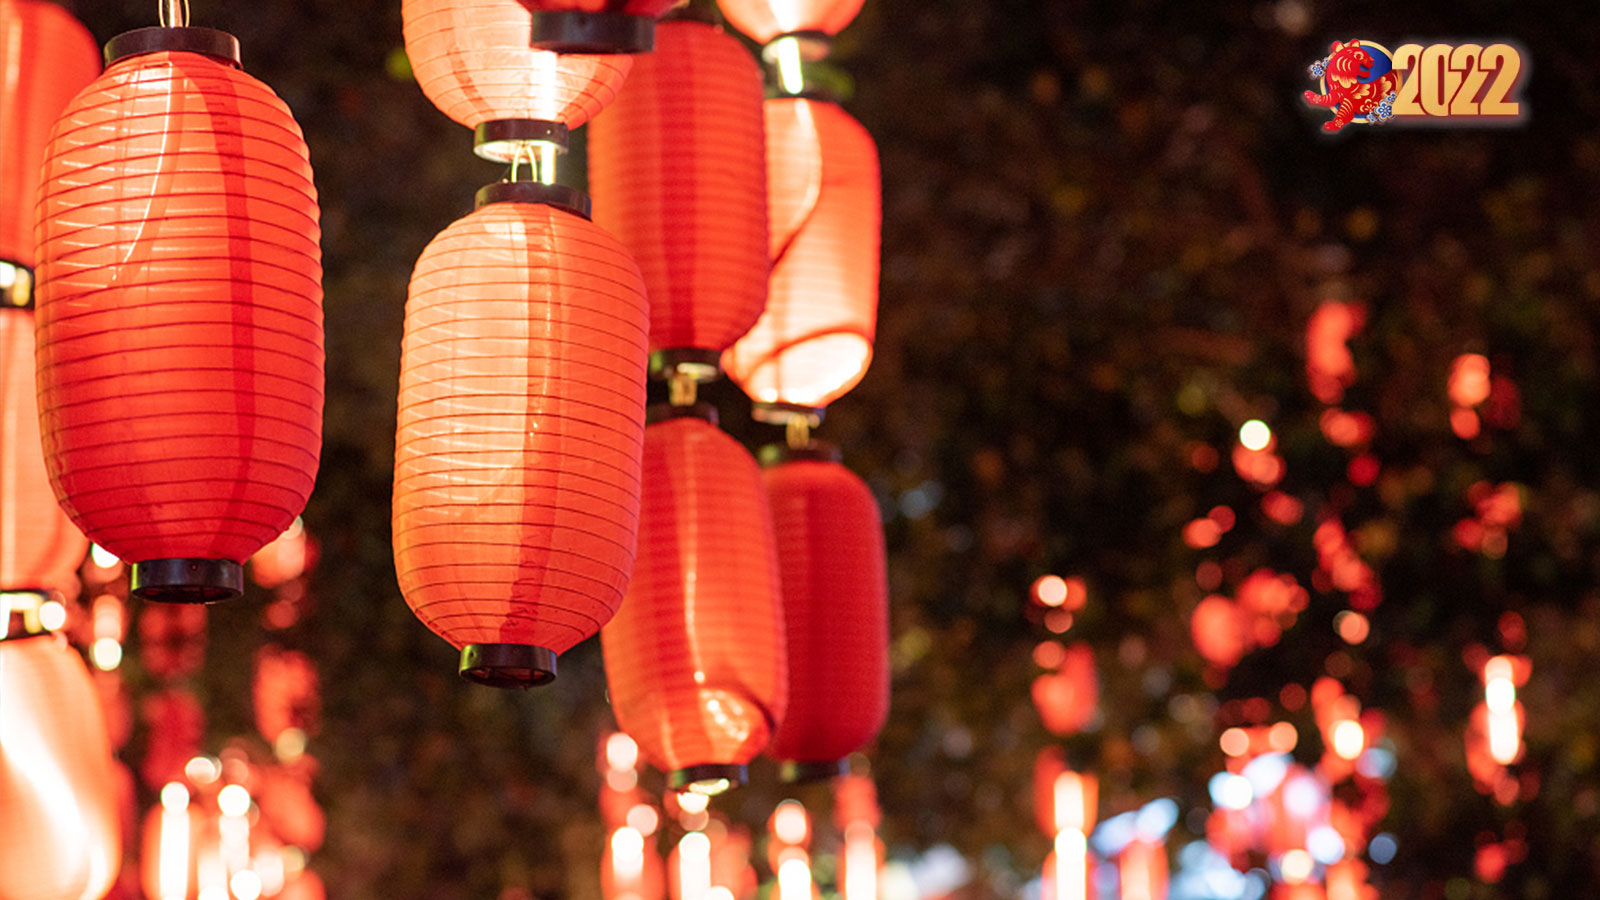 Why is the Chinese Lantern Festival celebrated?